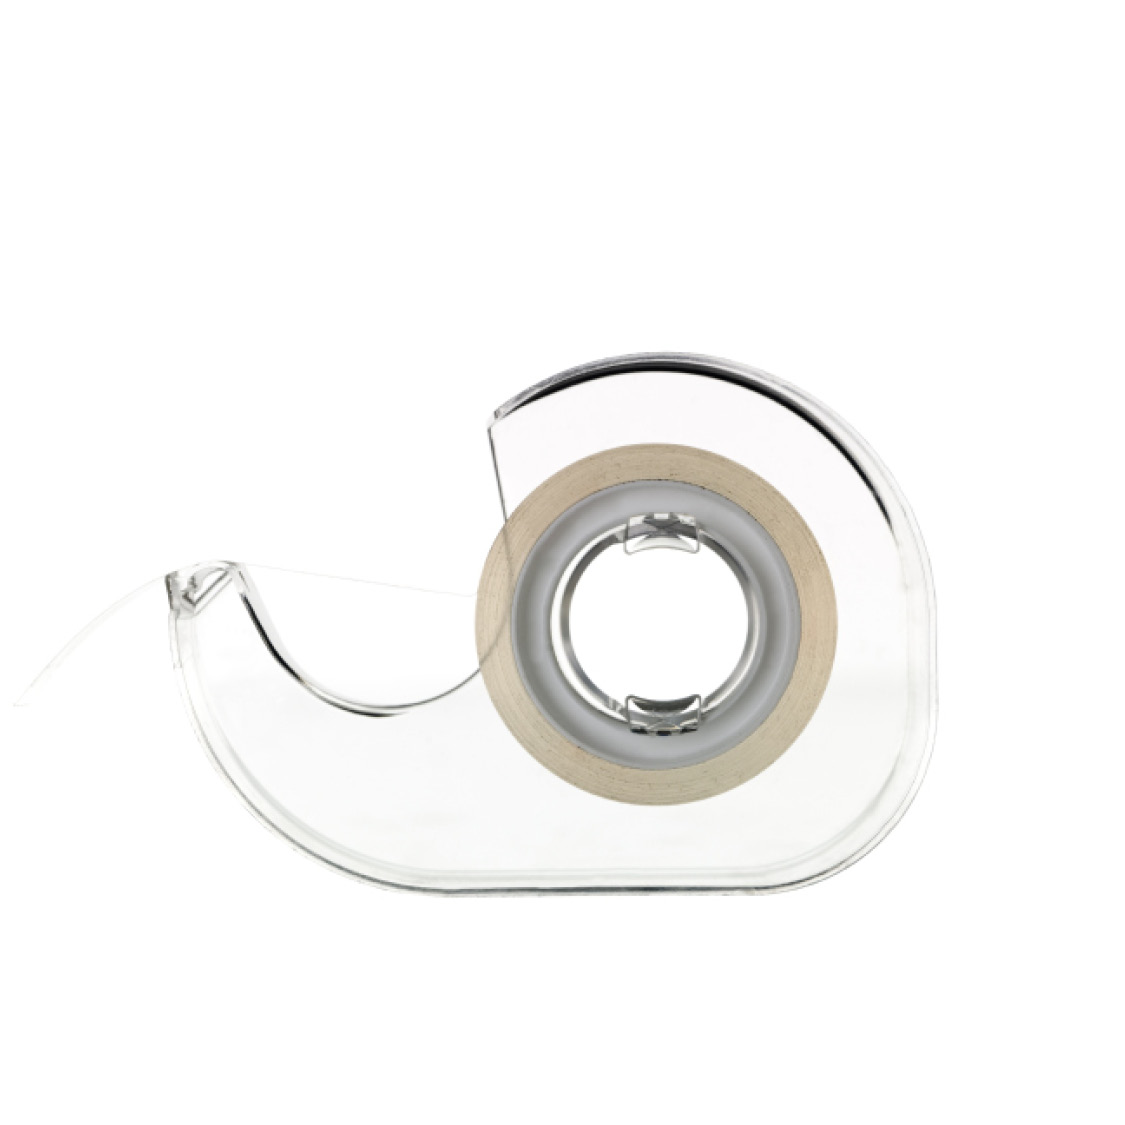 This is a roll of tape Tape is sticky and can be used on paper walls and - photo 24